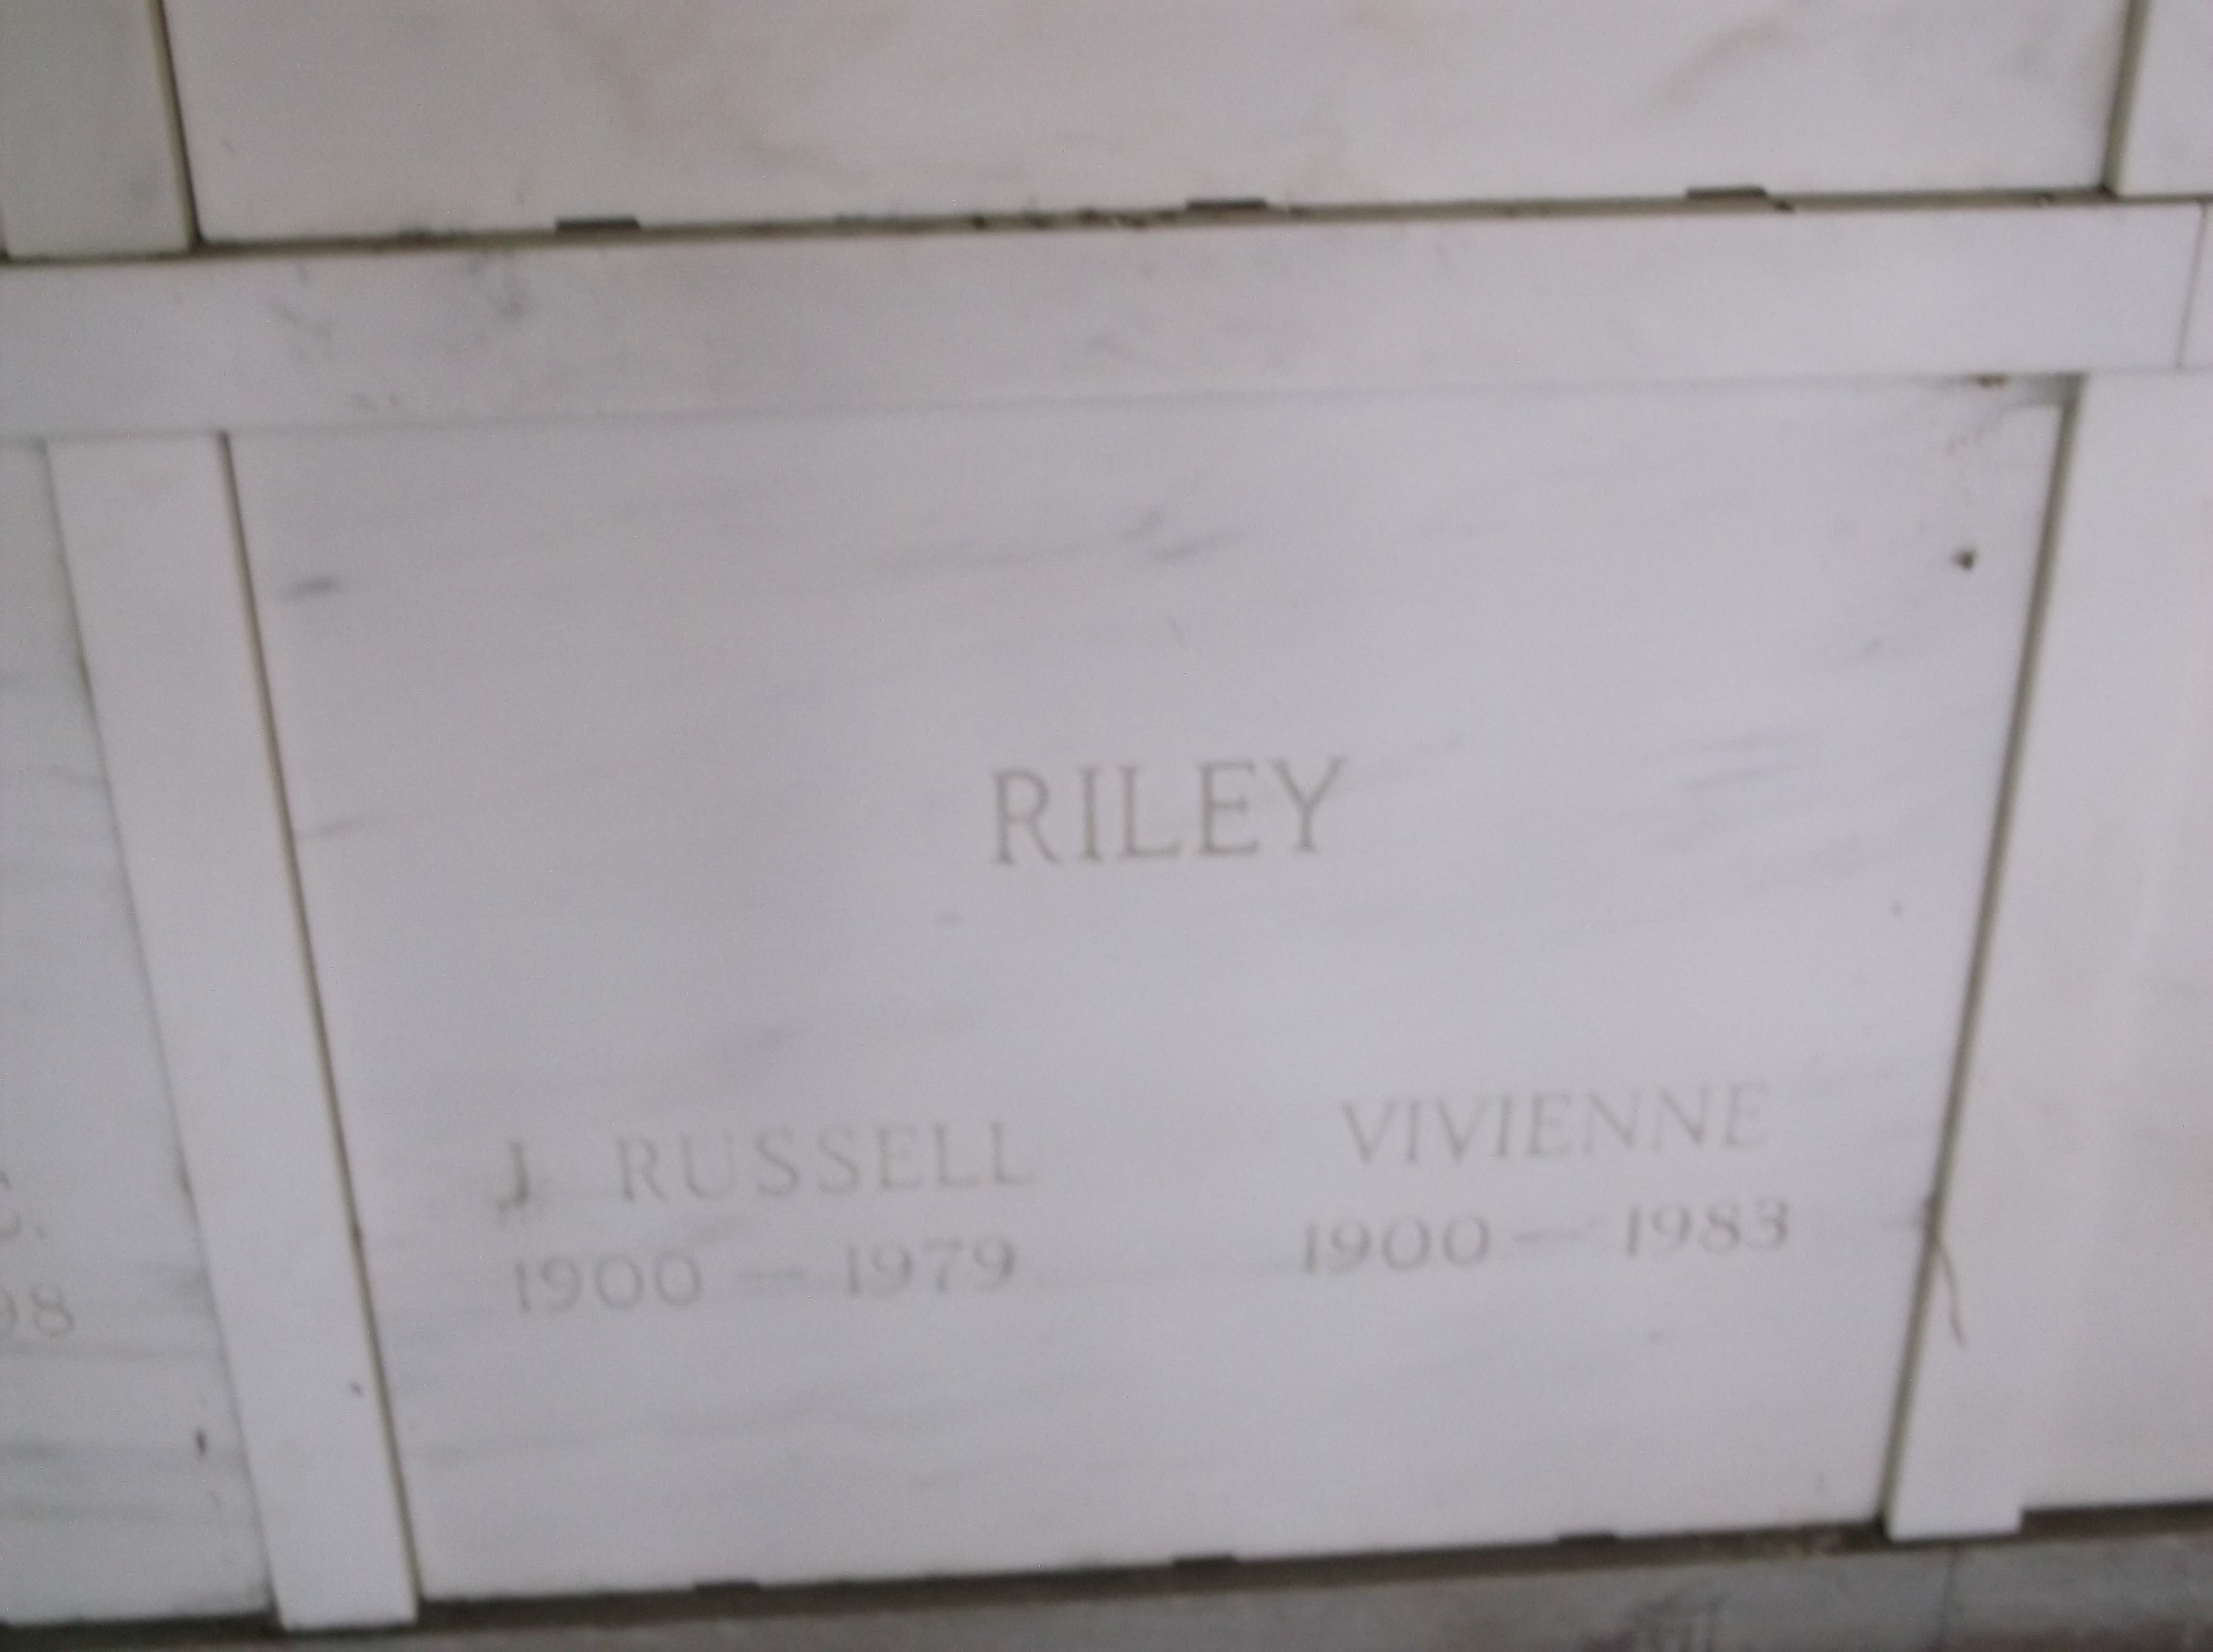 J Russell Riley